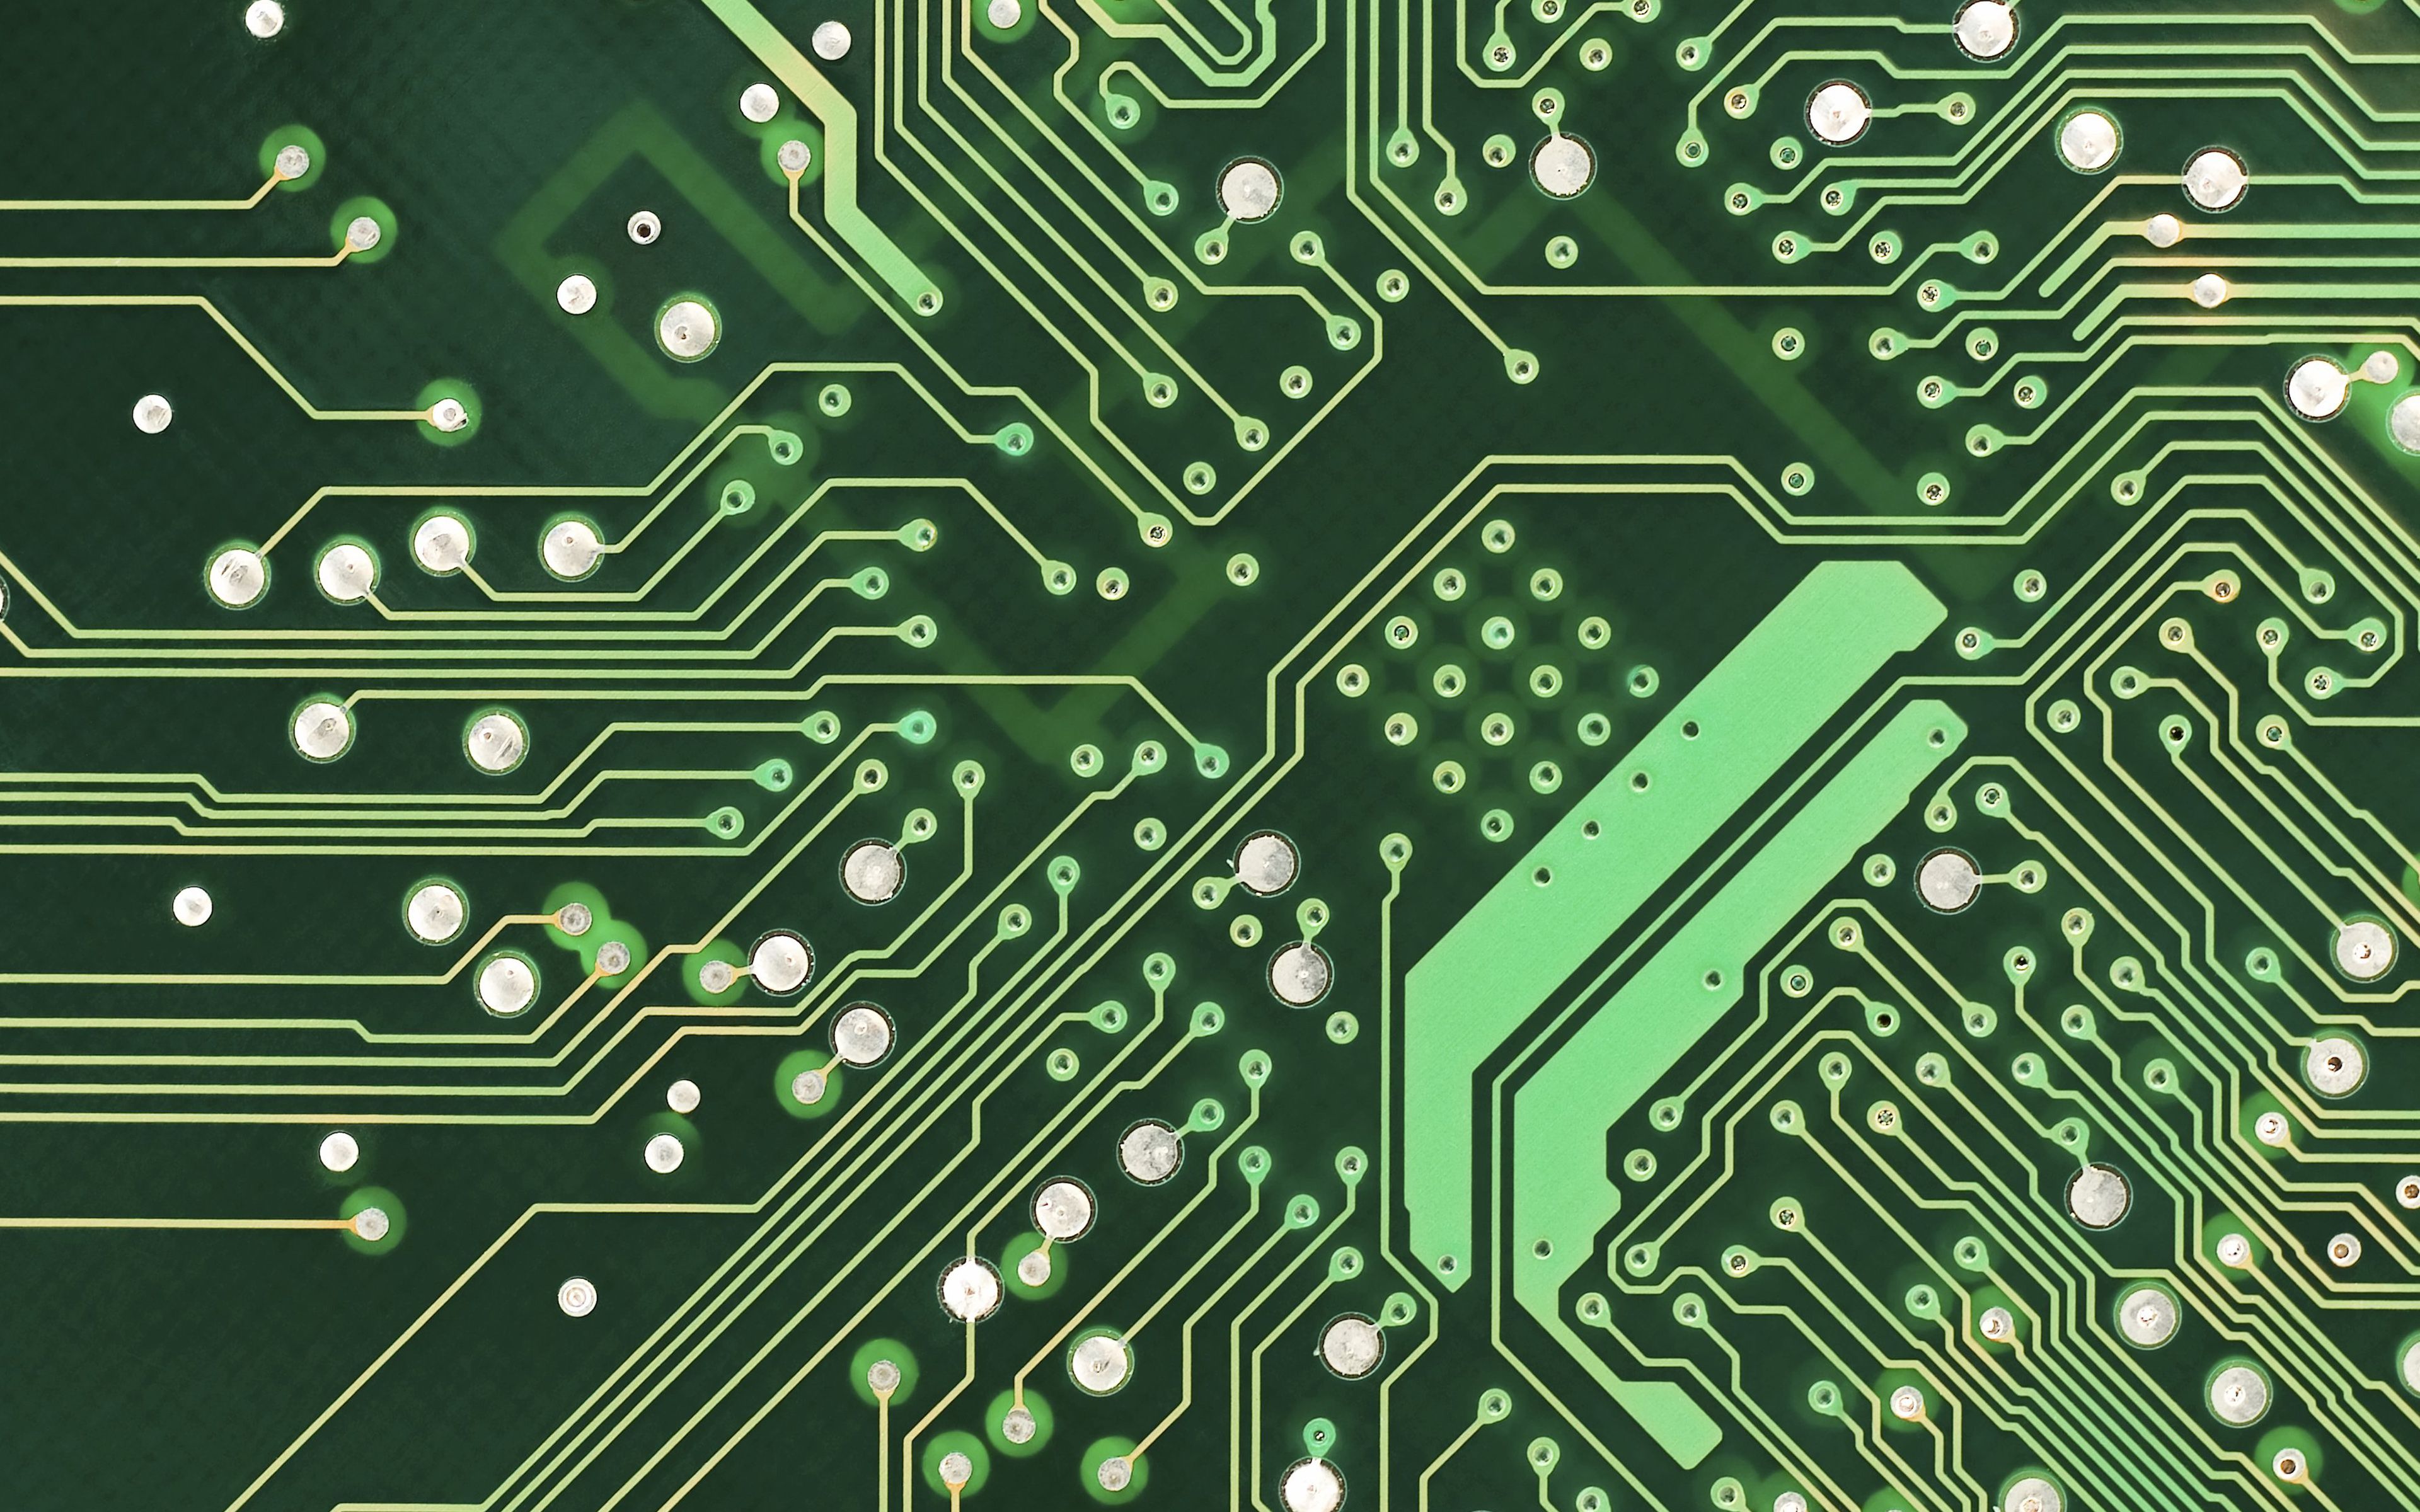 Download wallpaper green electronic circuit texture, digital background, electronic circuit, board texture, green technology background for desktop with resolution 3840x2400. High Quality HD picture wallpaper